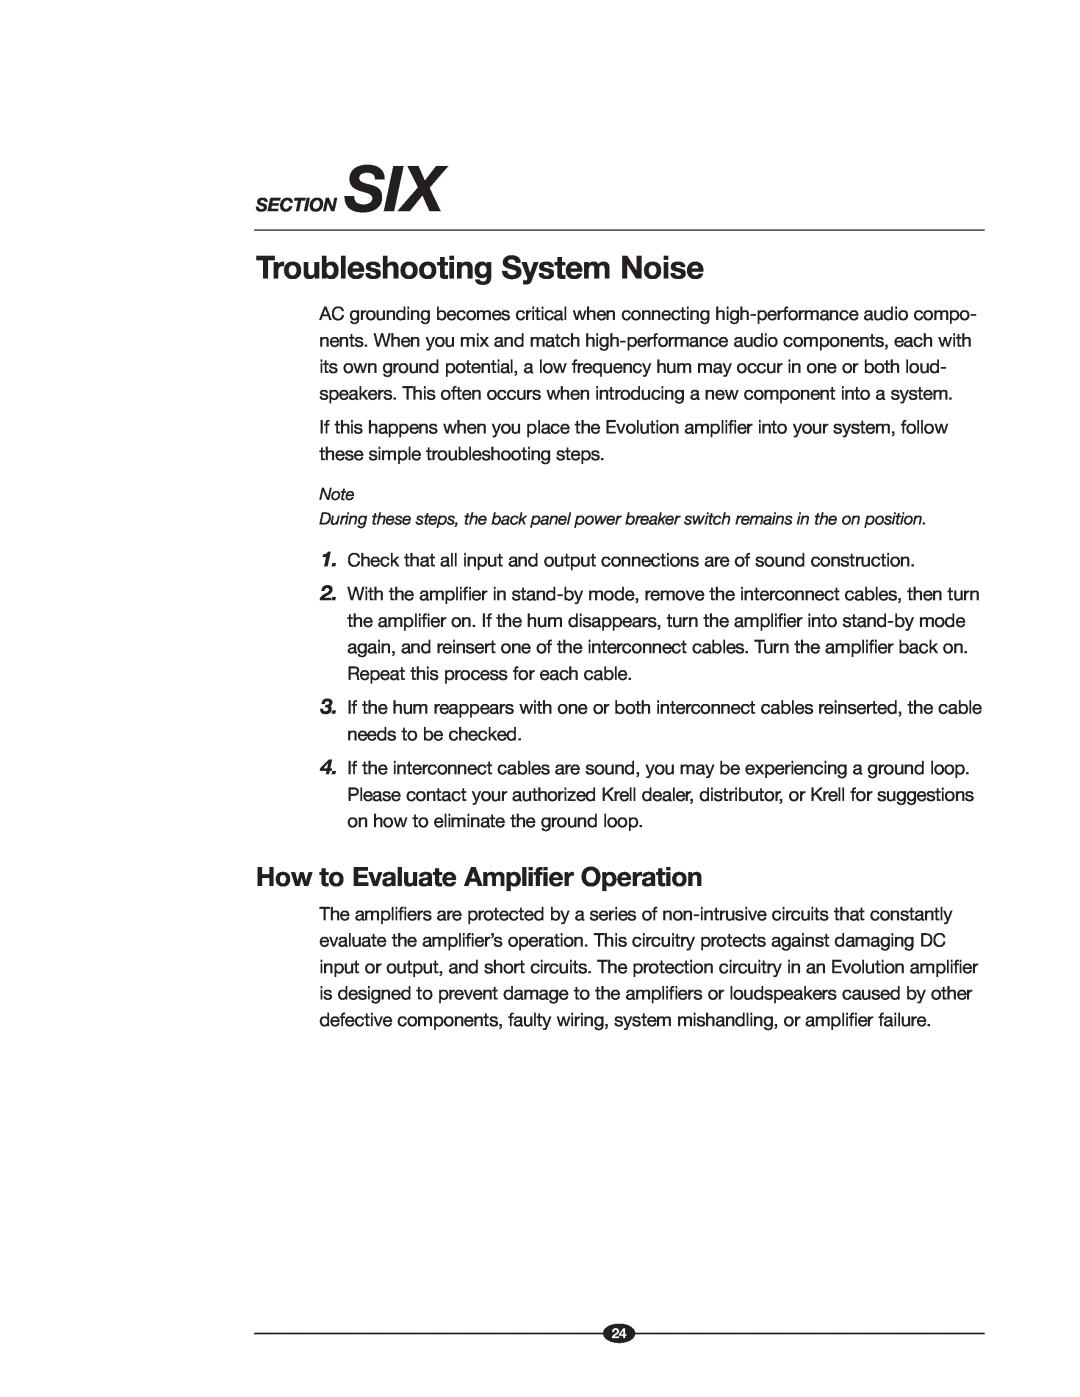 Krell Industries Evolution manual Troubleshooting System Noise, How to Evaluate Amplifier Operation 